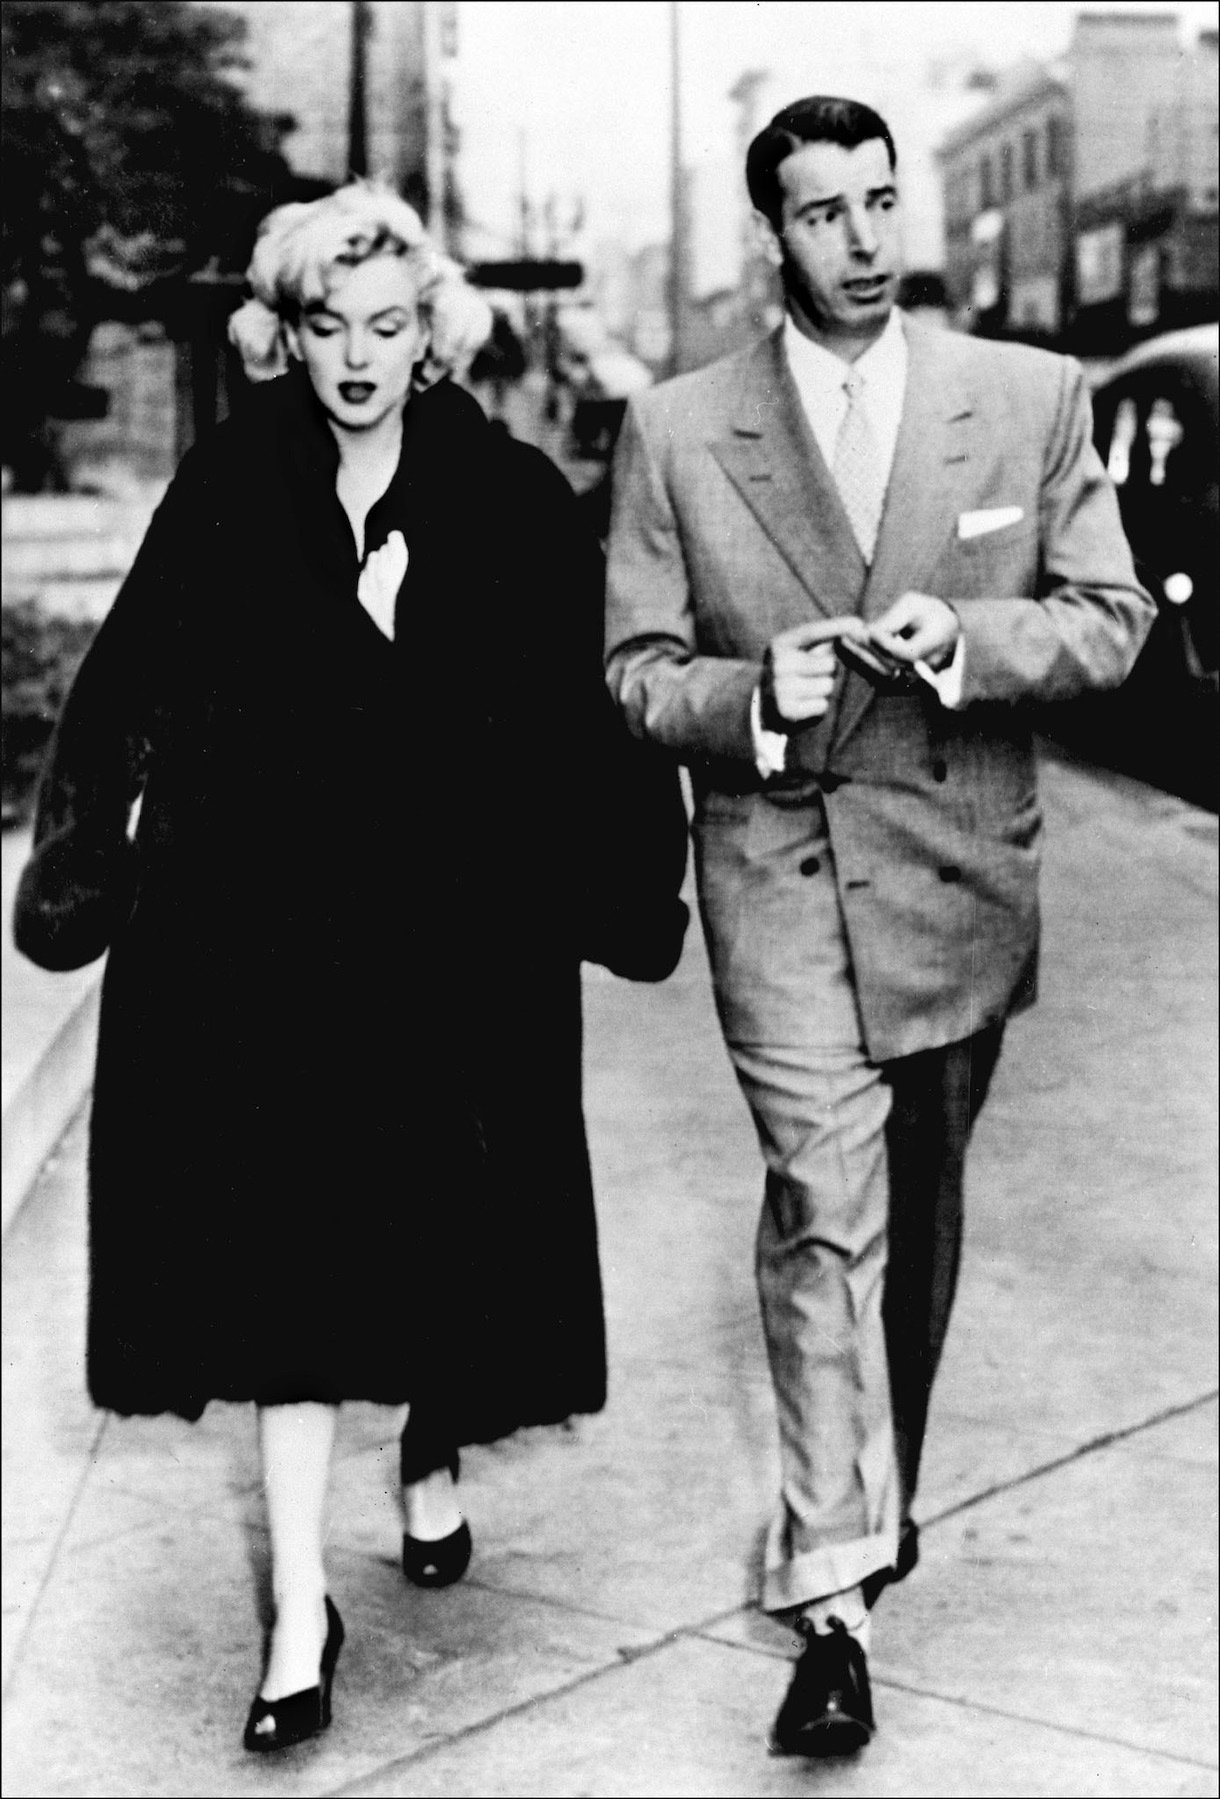 Picture dated 1954 showing actress Marilyn Monroe and Joe DiMaggio